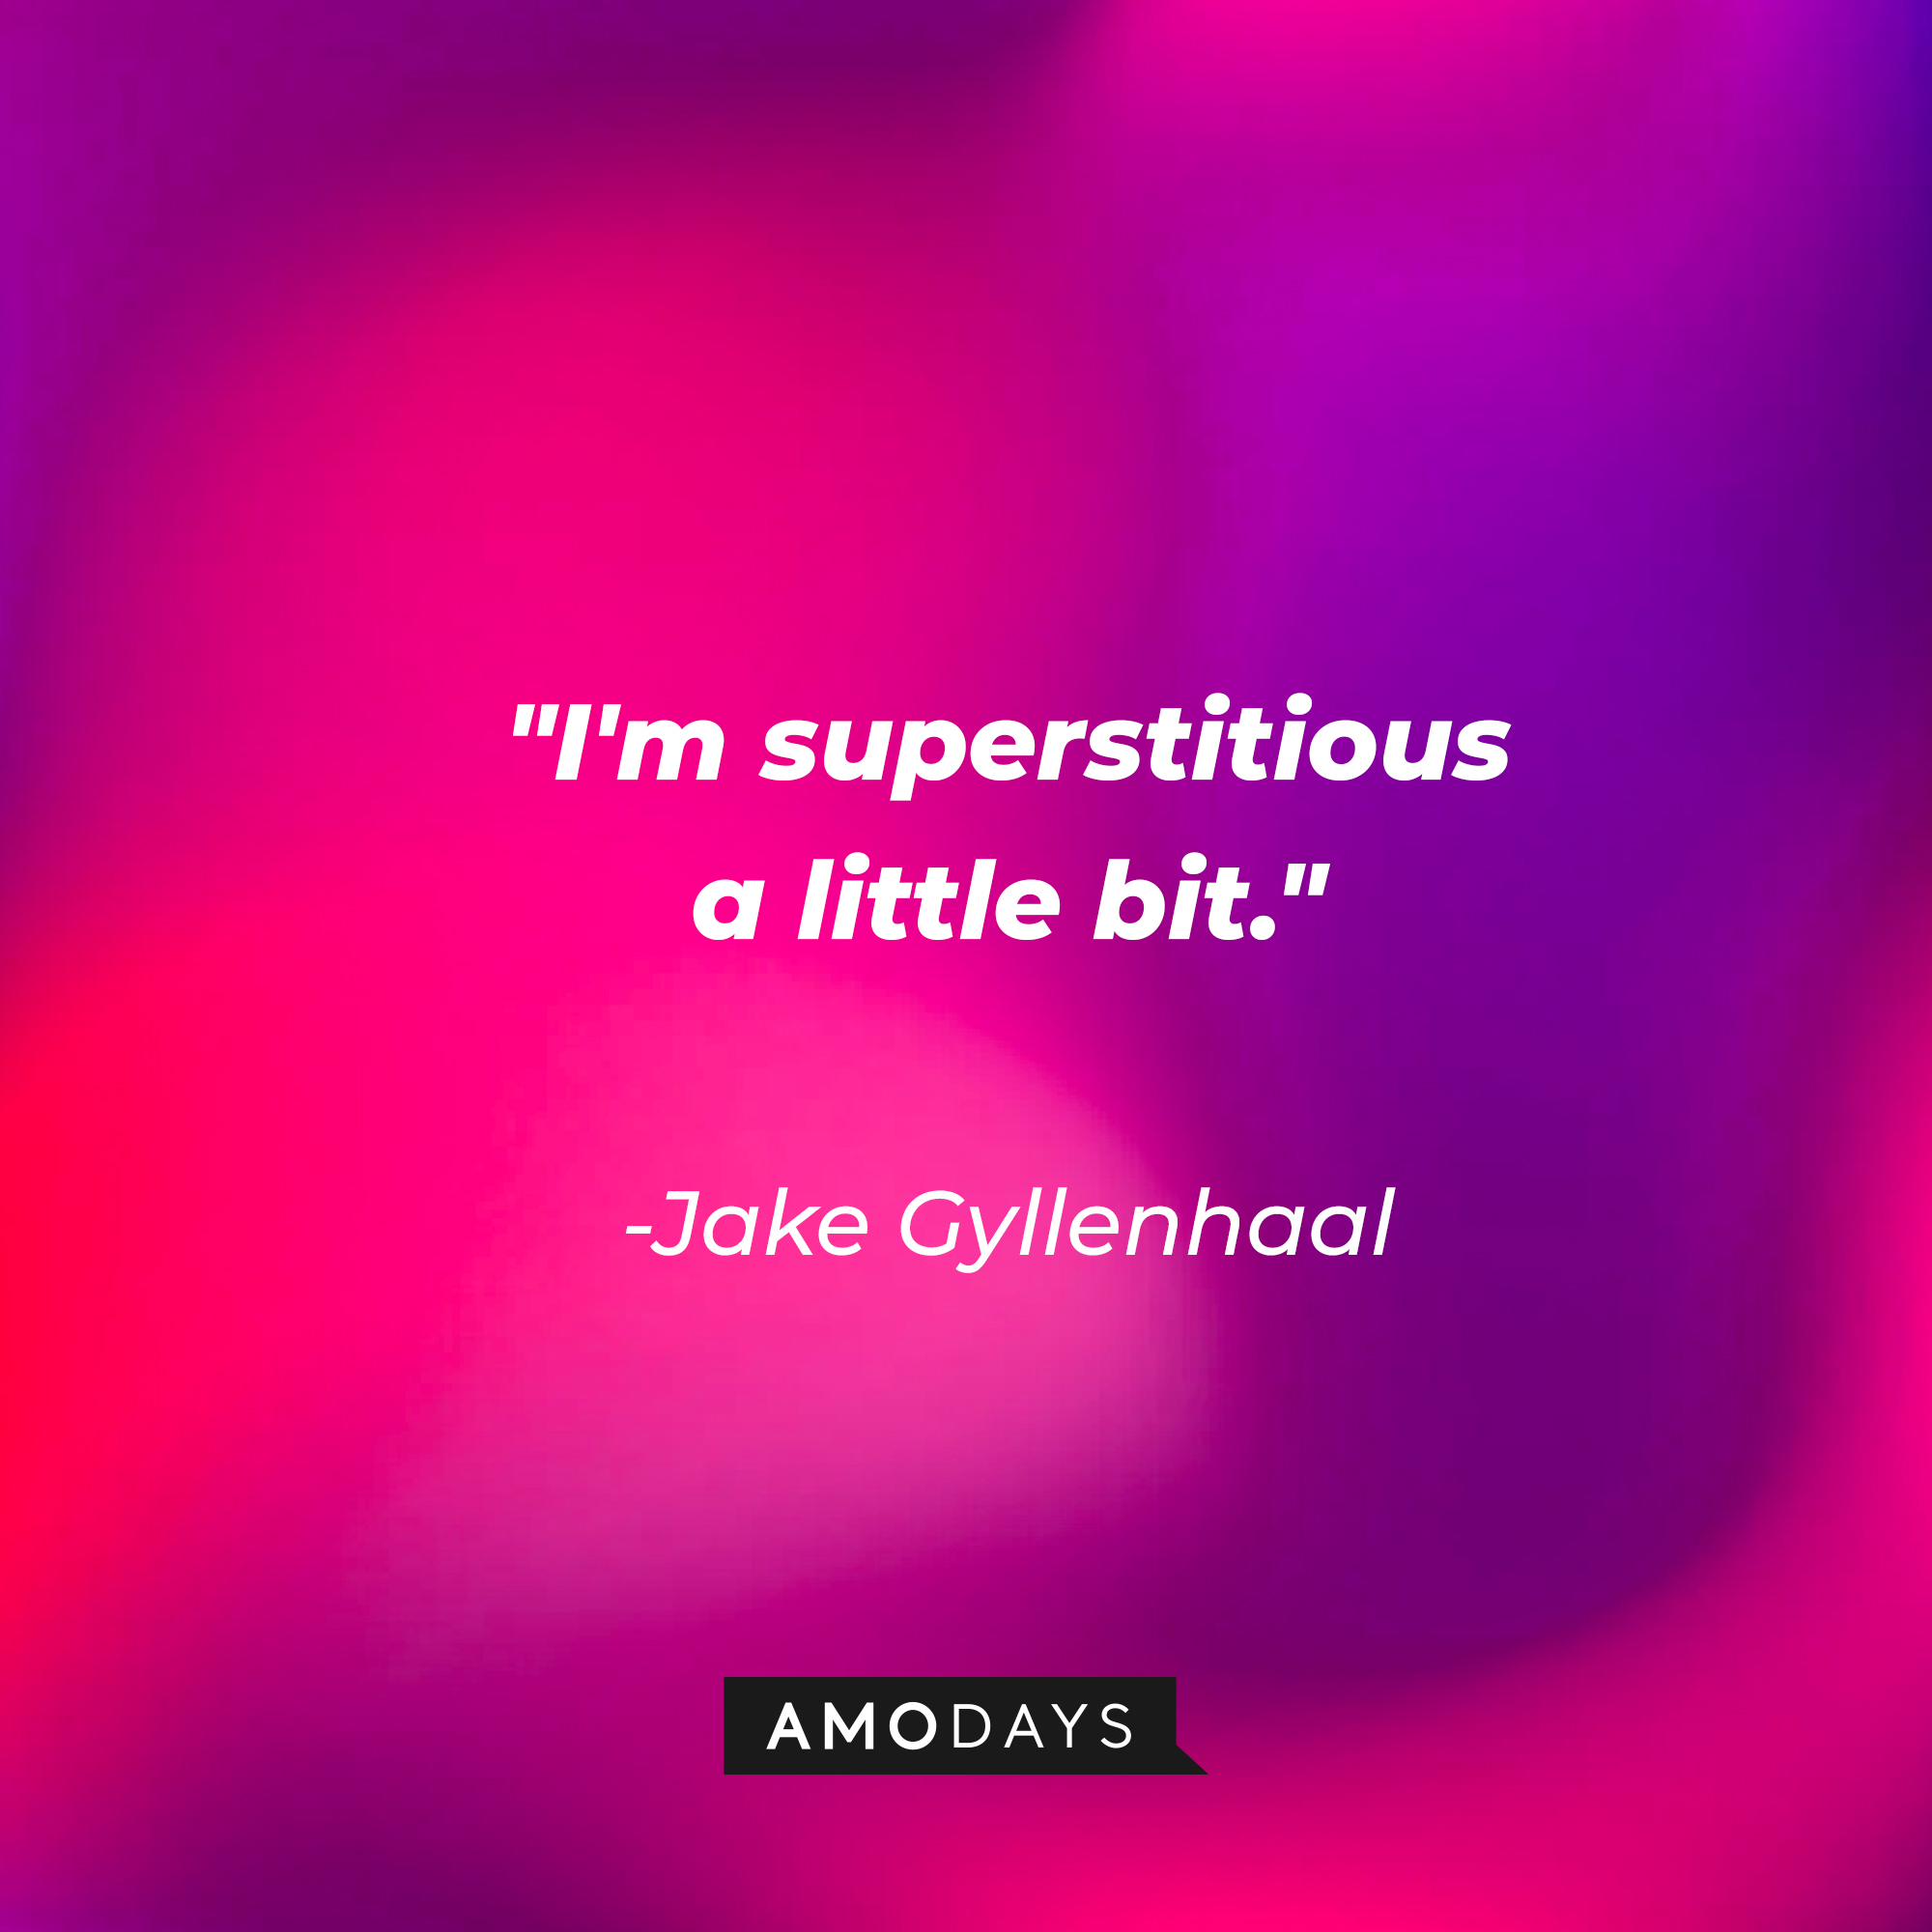 Jake Gyllenhaal's quote: "I'm superstitious a little bit." | Source: AmoDays